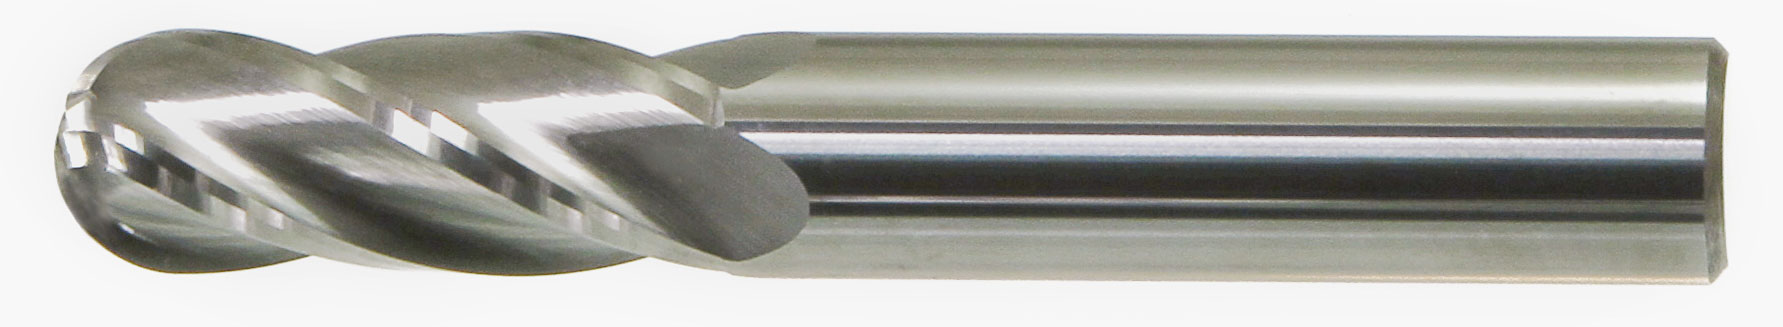 Fullerton Tool 32167 7/16 4 Flute Solid Carbide Uncoated Ball End Mill